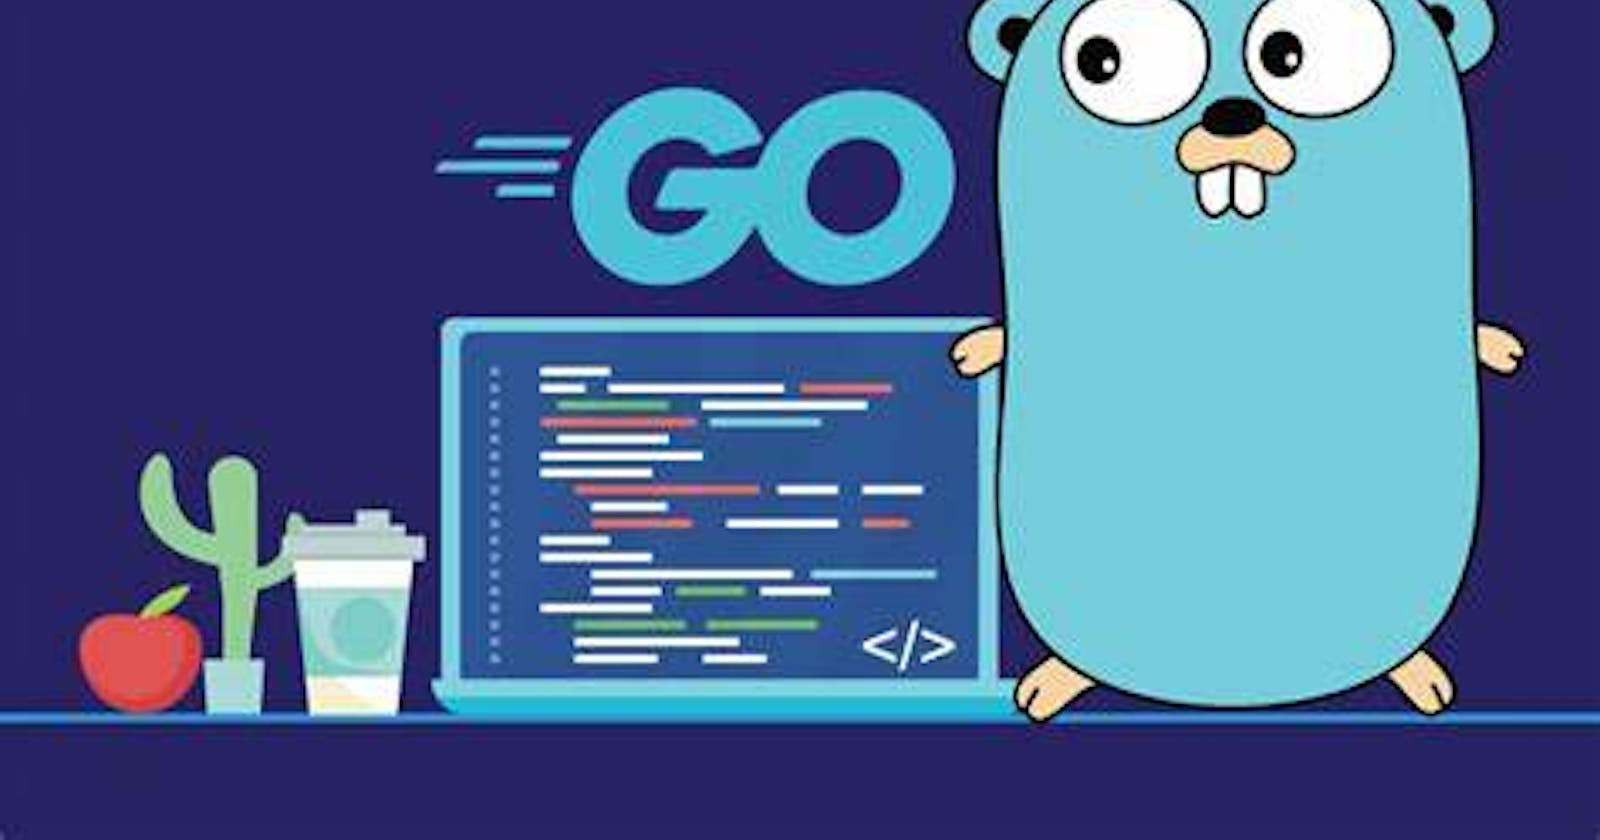 Go: Getting Started